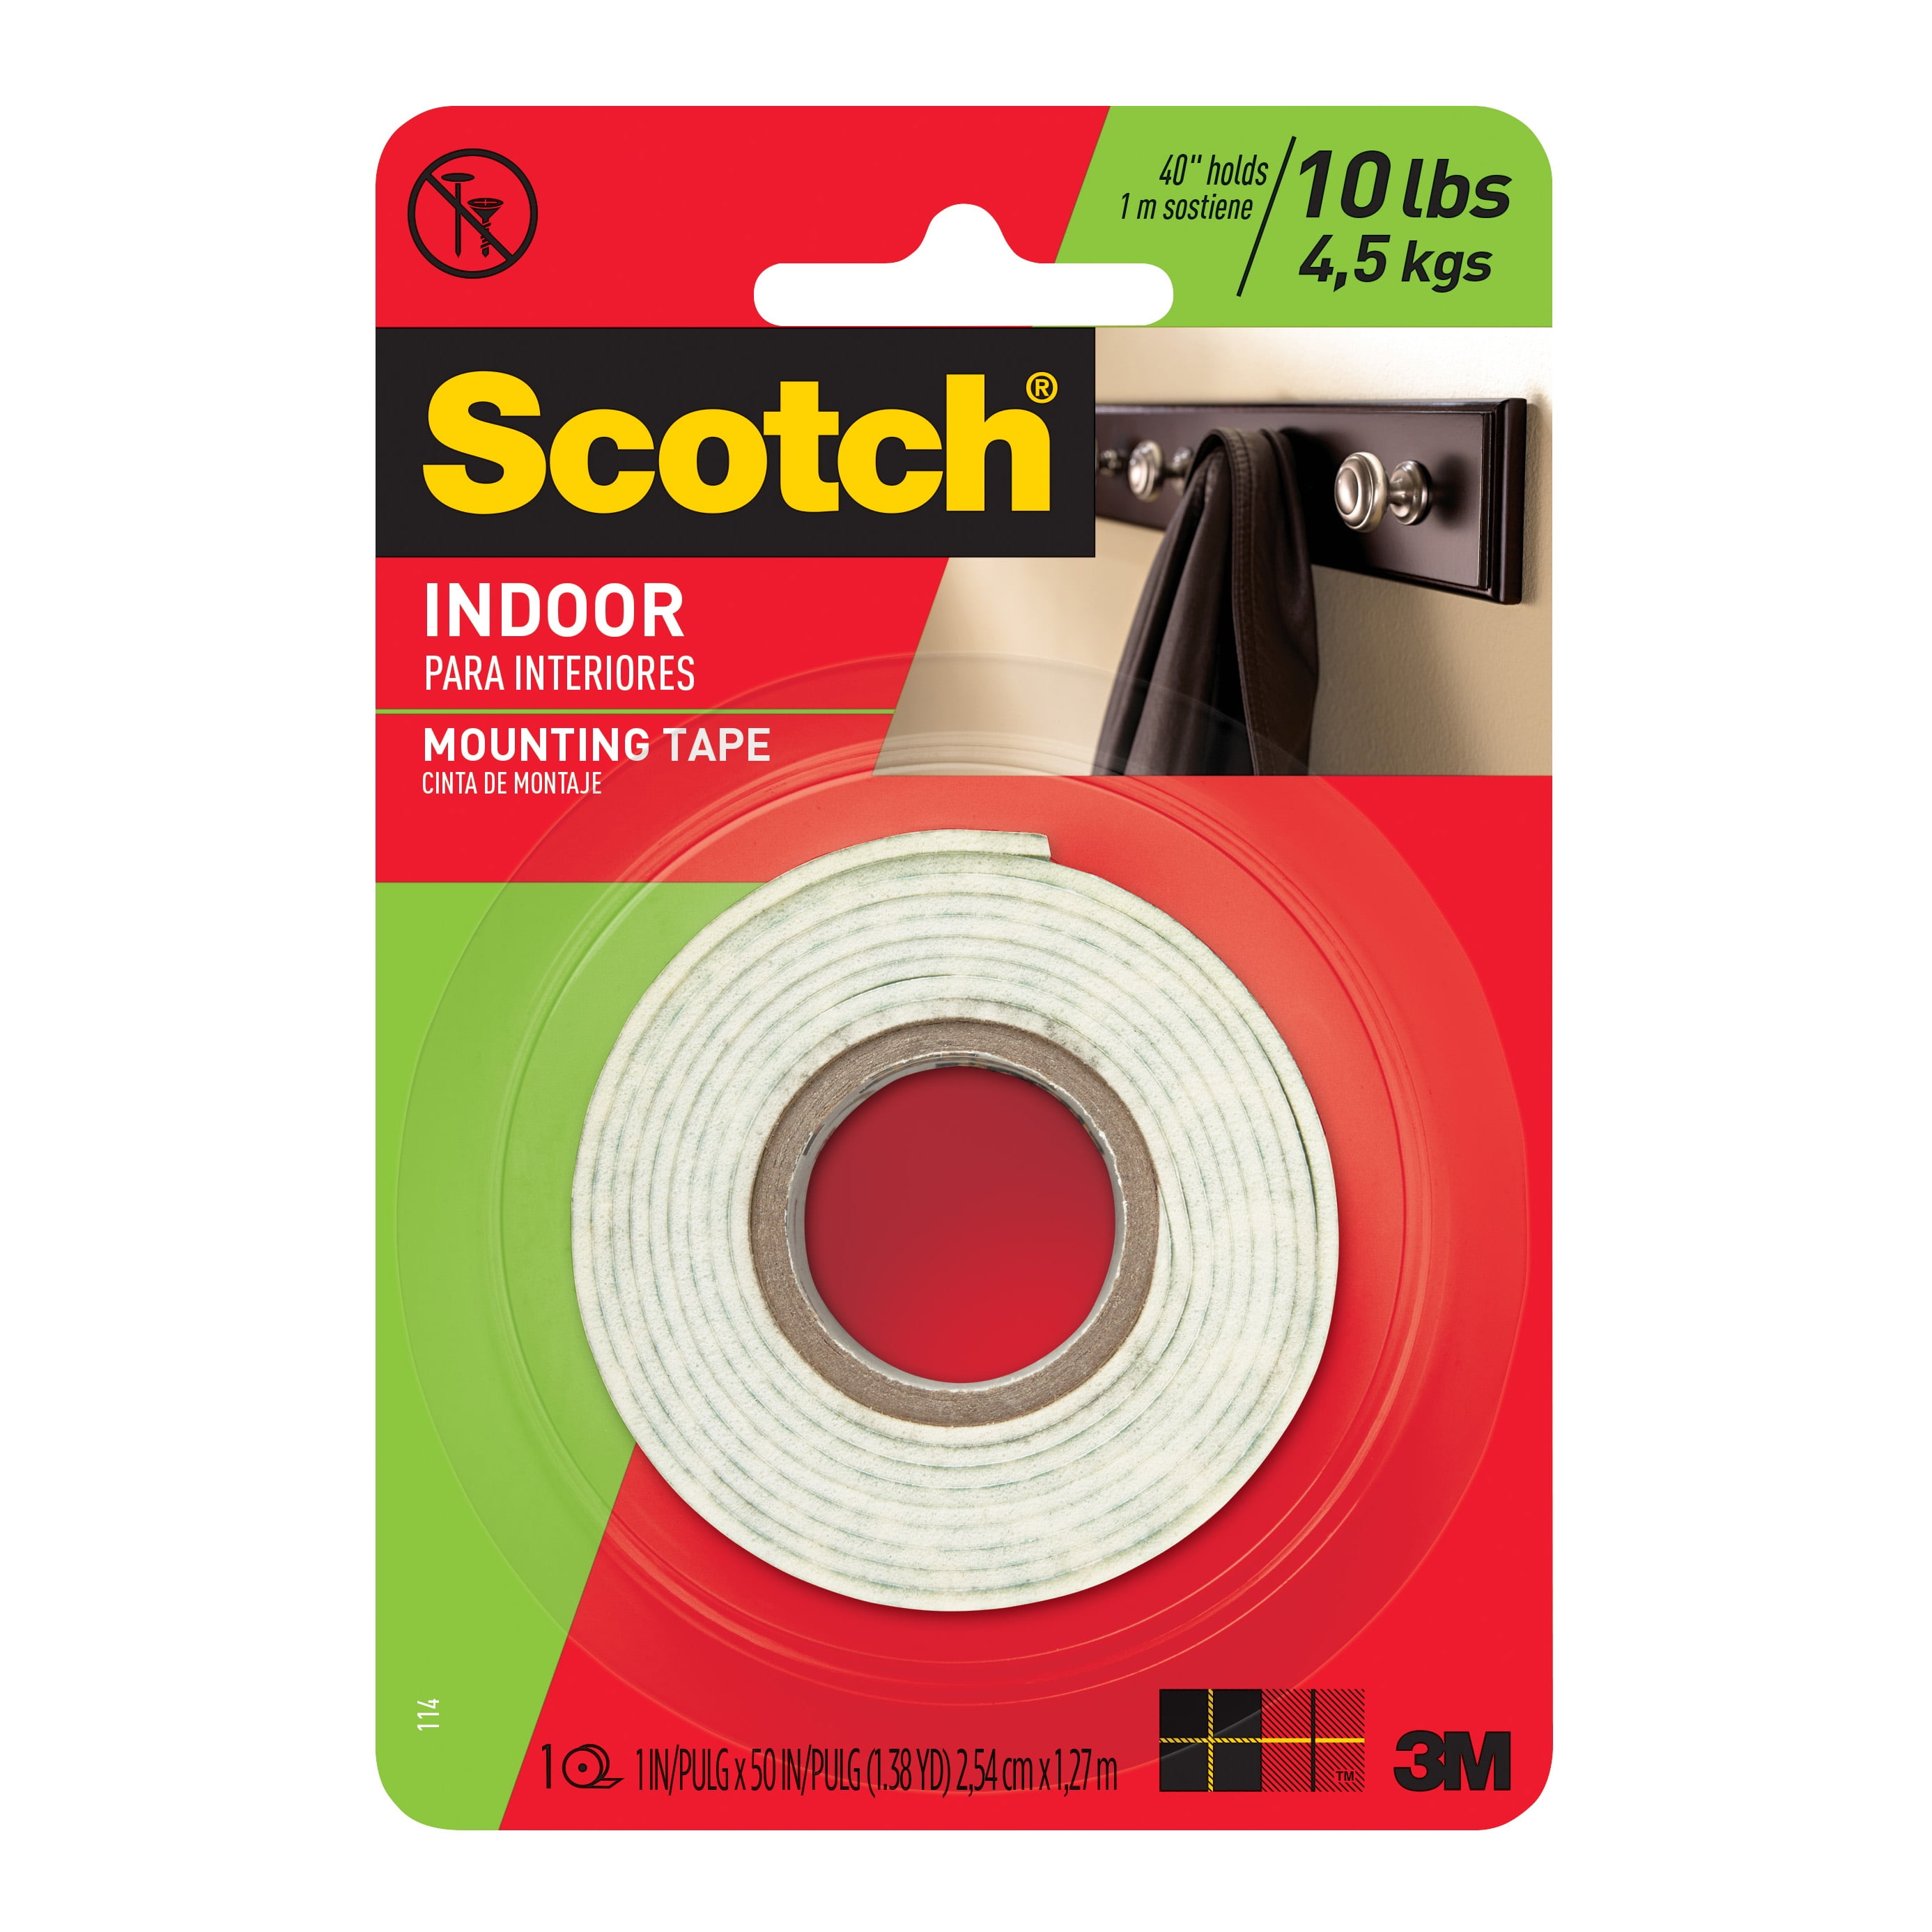 Select 3M Scotch 670 Poster Tape 18/24mm x 12M for Mental Glass Mirrors etc. 